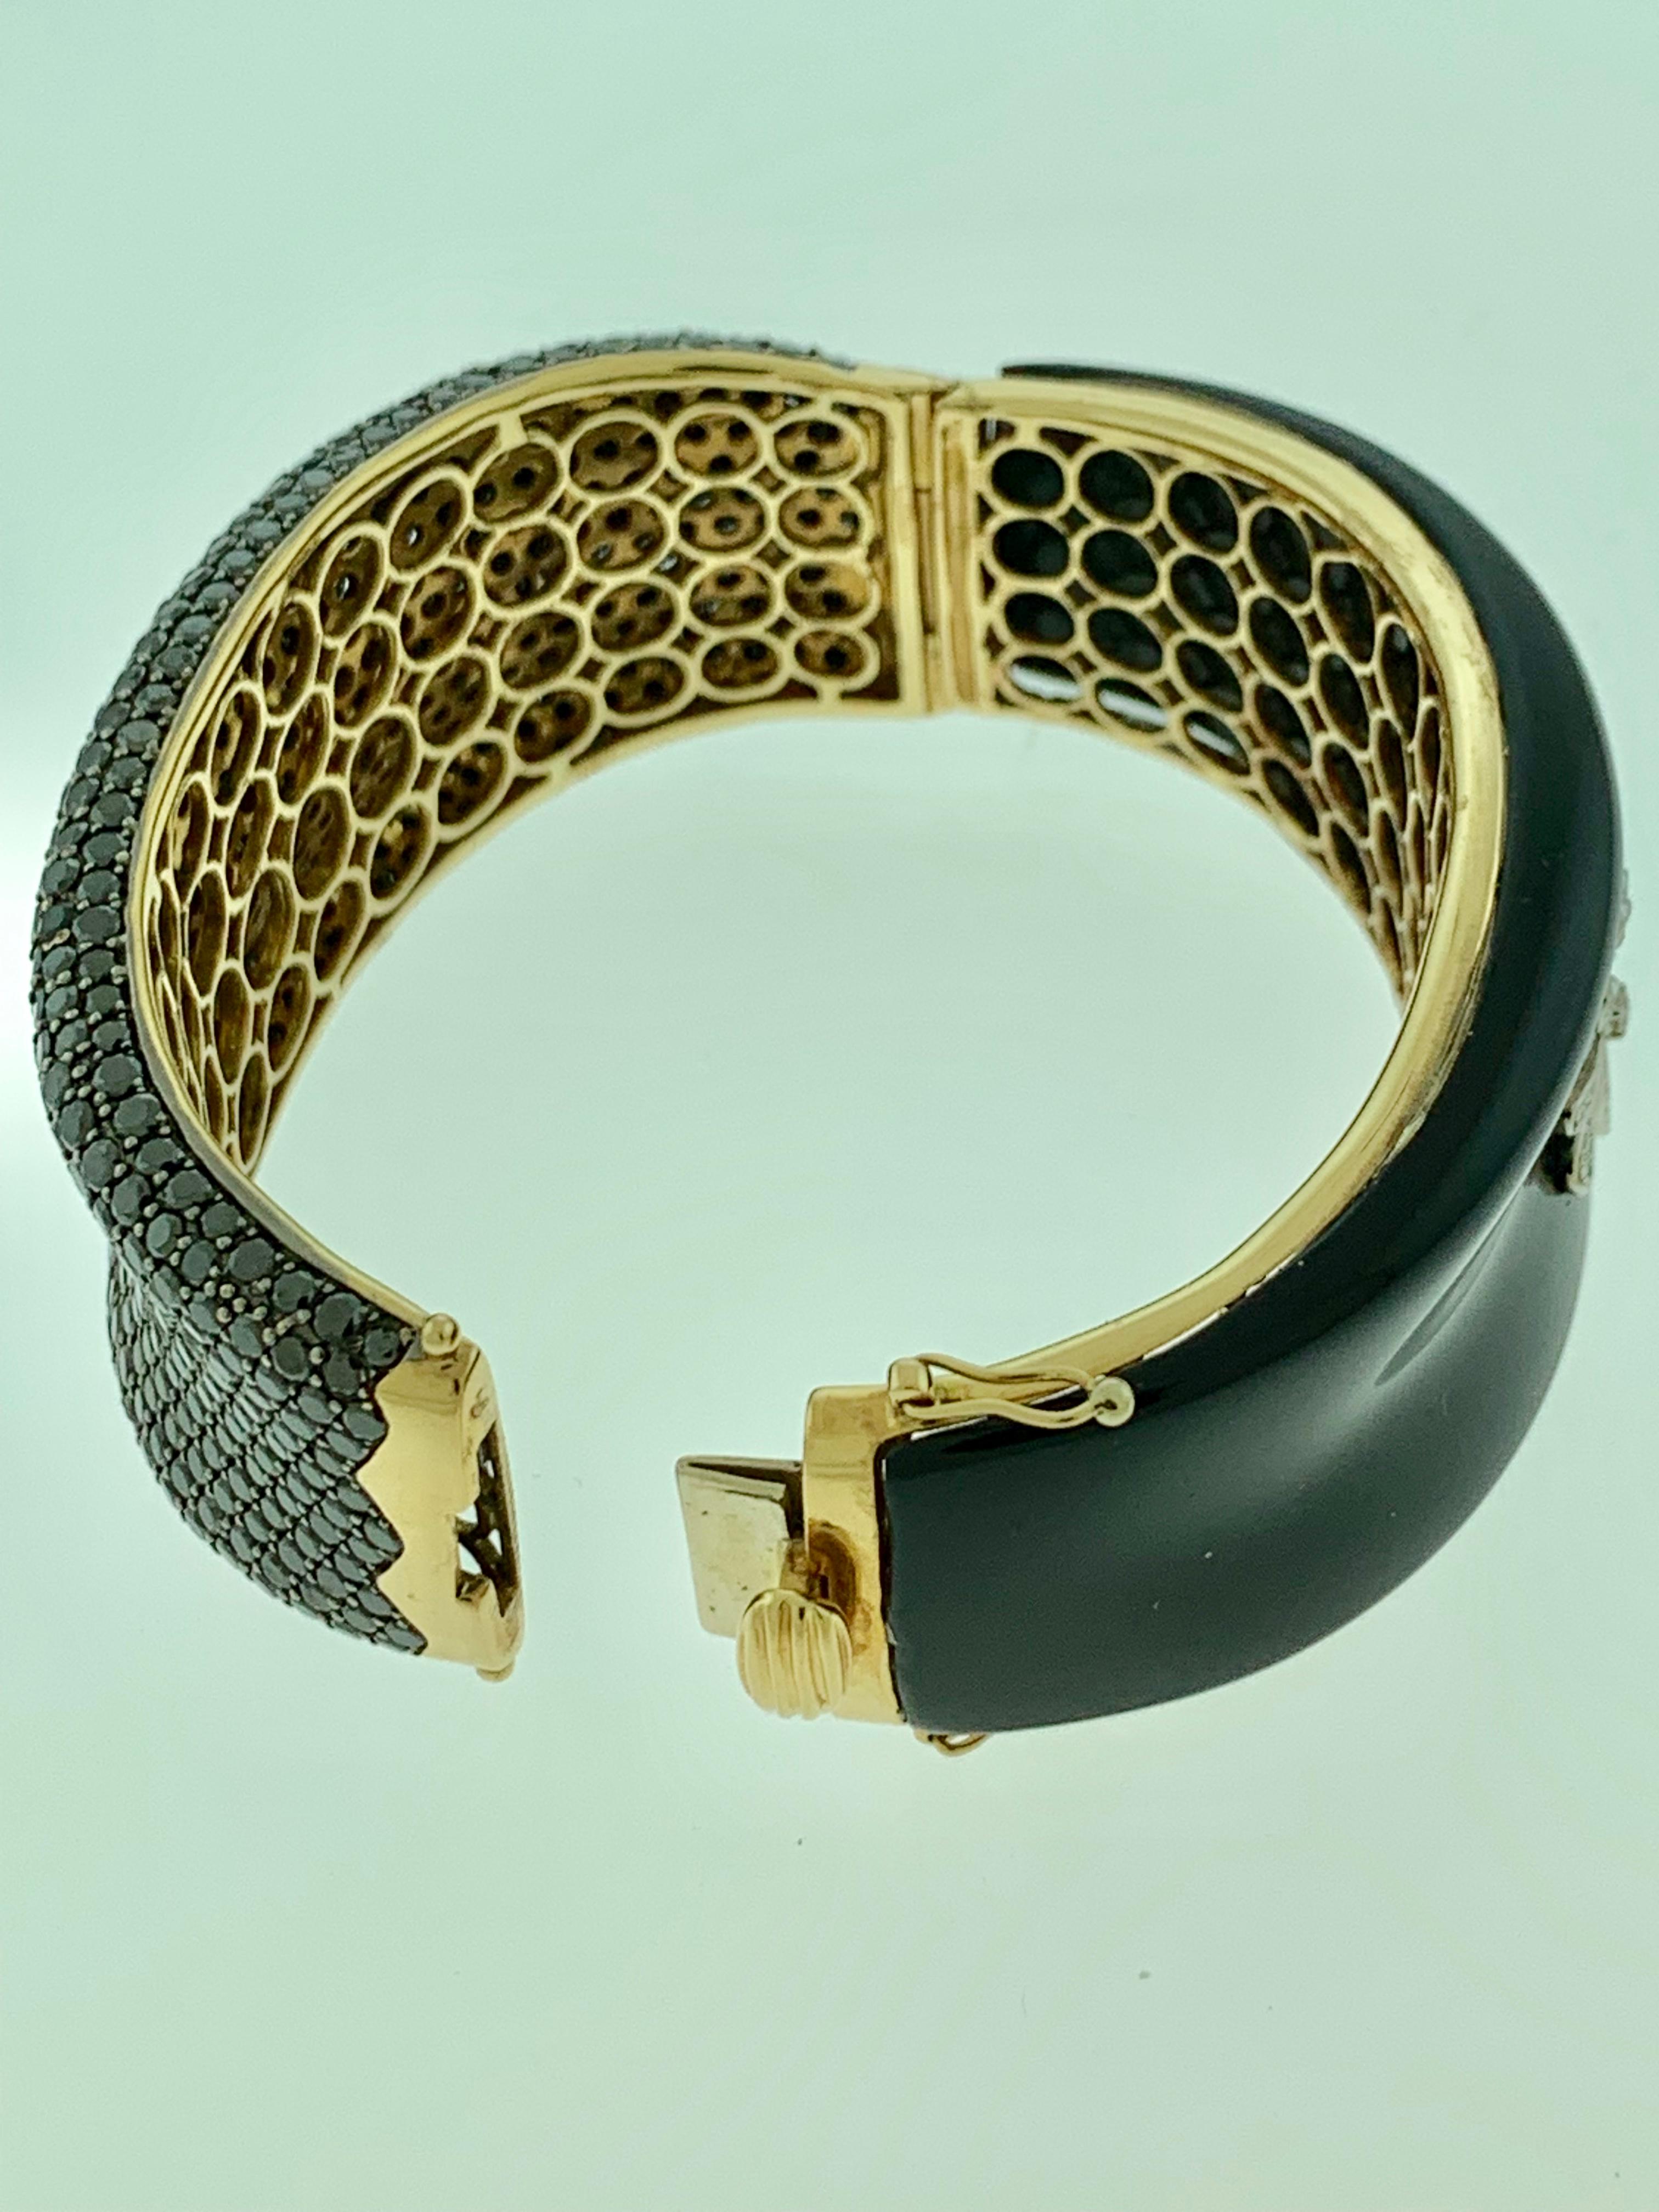 Black Diamond & Black Onyx & Diamond  Bangle In 18 Karat Yellow Gold 88 Grams
Weight of the bangle in 18k Yellow  gold  :  88 Grams
It features a bangle style  Bracelet crafted from an 18k Yellow gold and embedded one side with approximately 30 ct